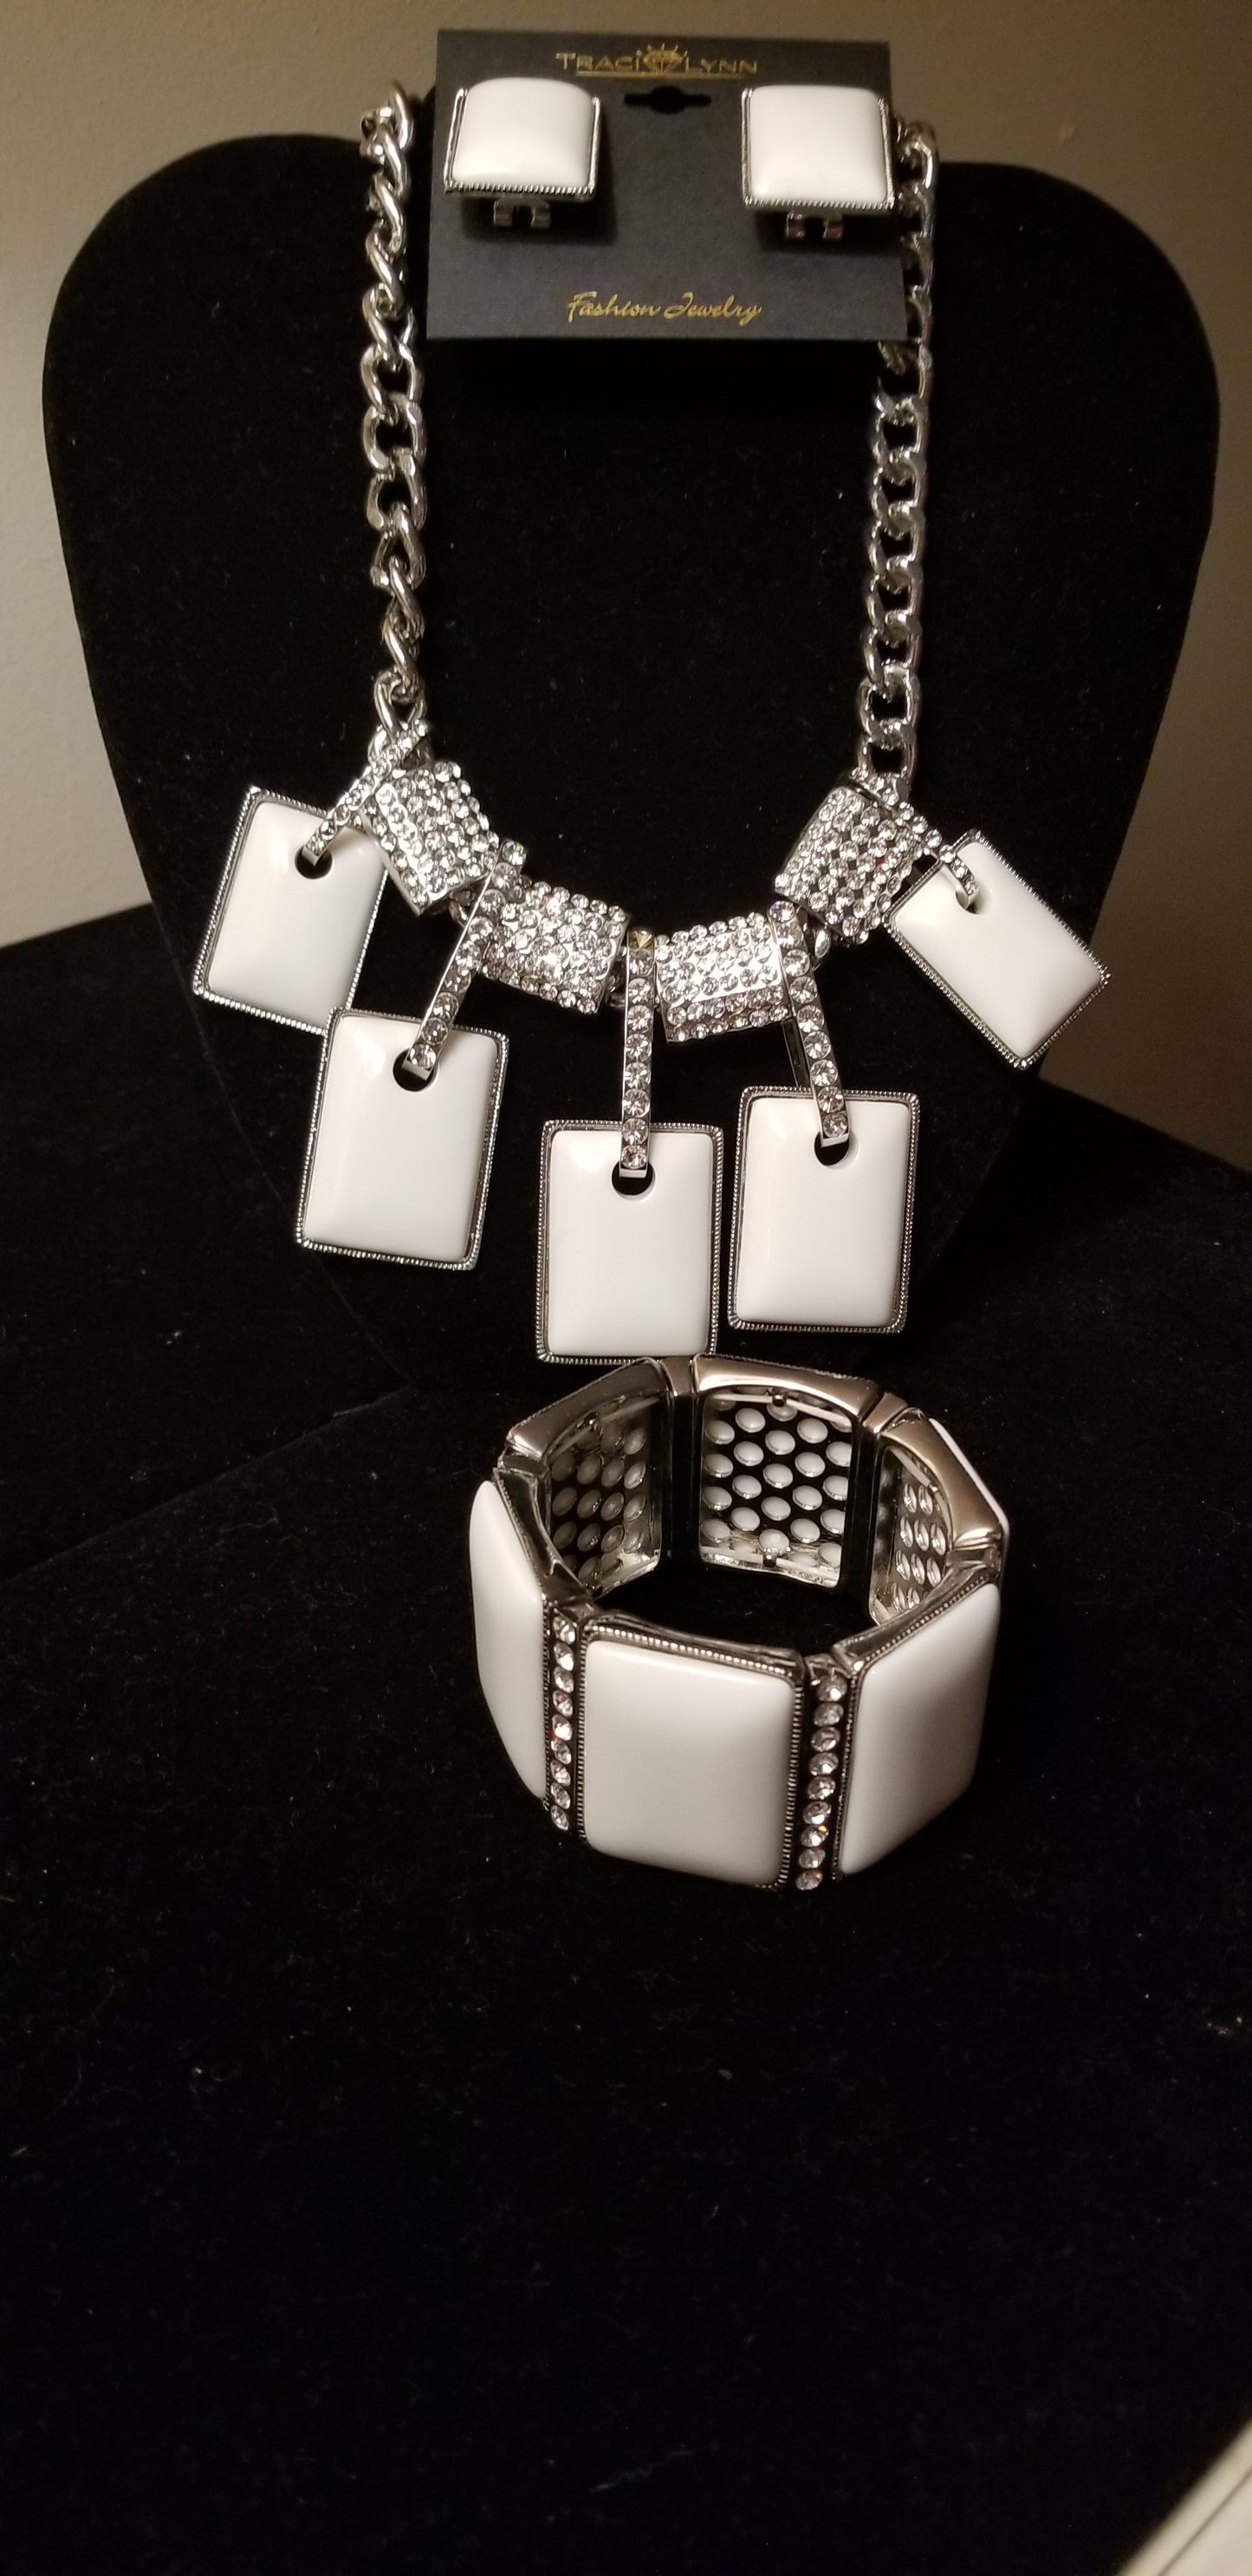 White Out Necklace/ Bracelet/ Earrings and Shout Out Necklace/ Bracelet/ Earrings